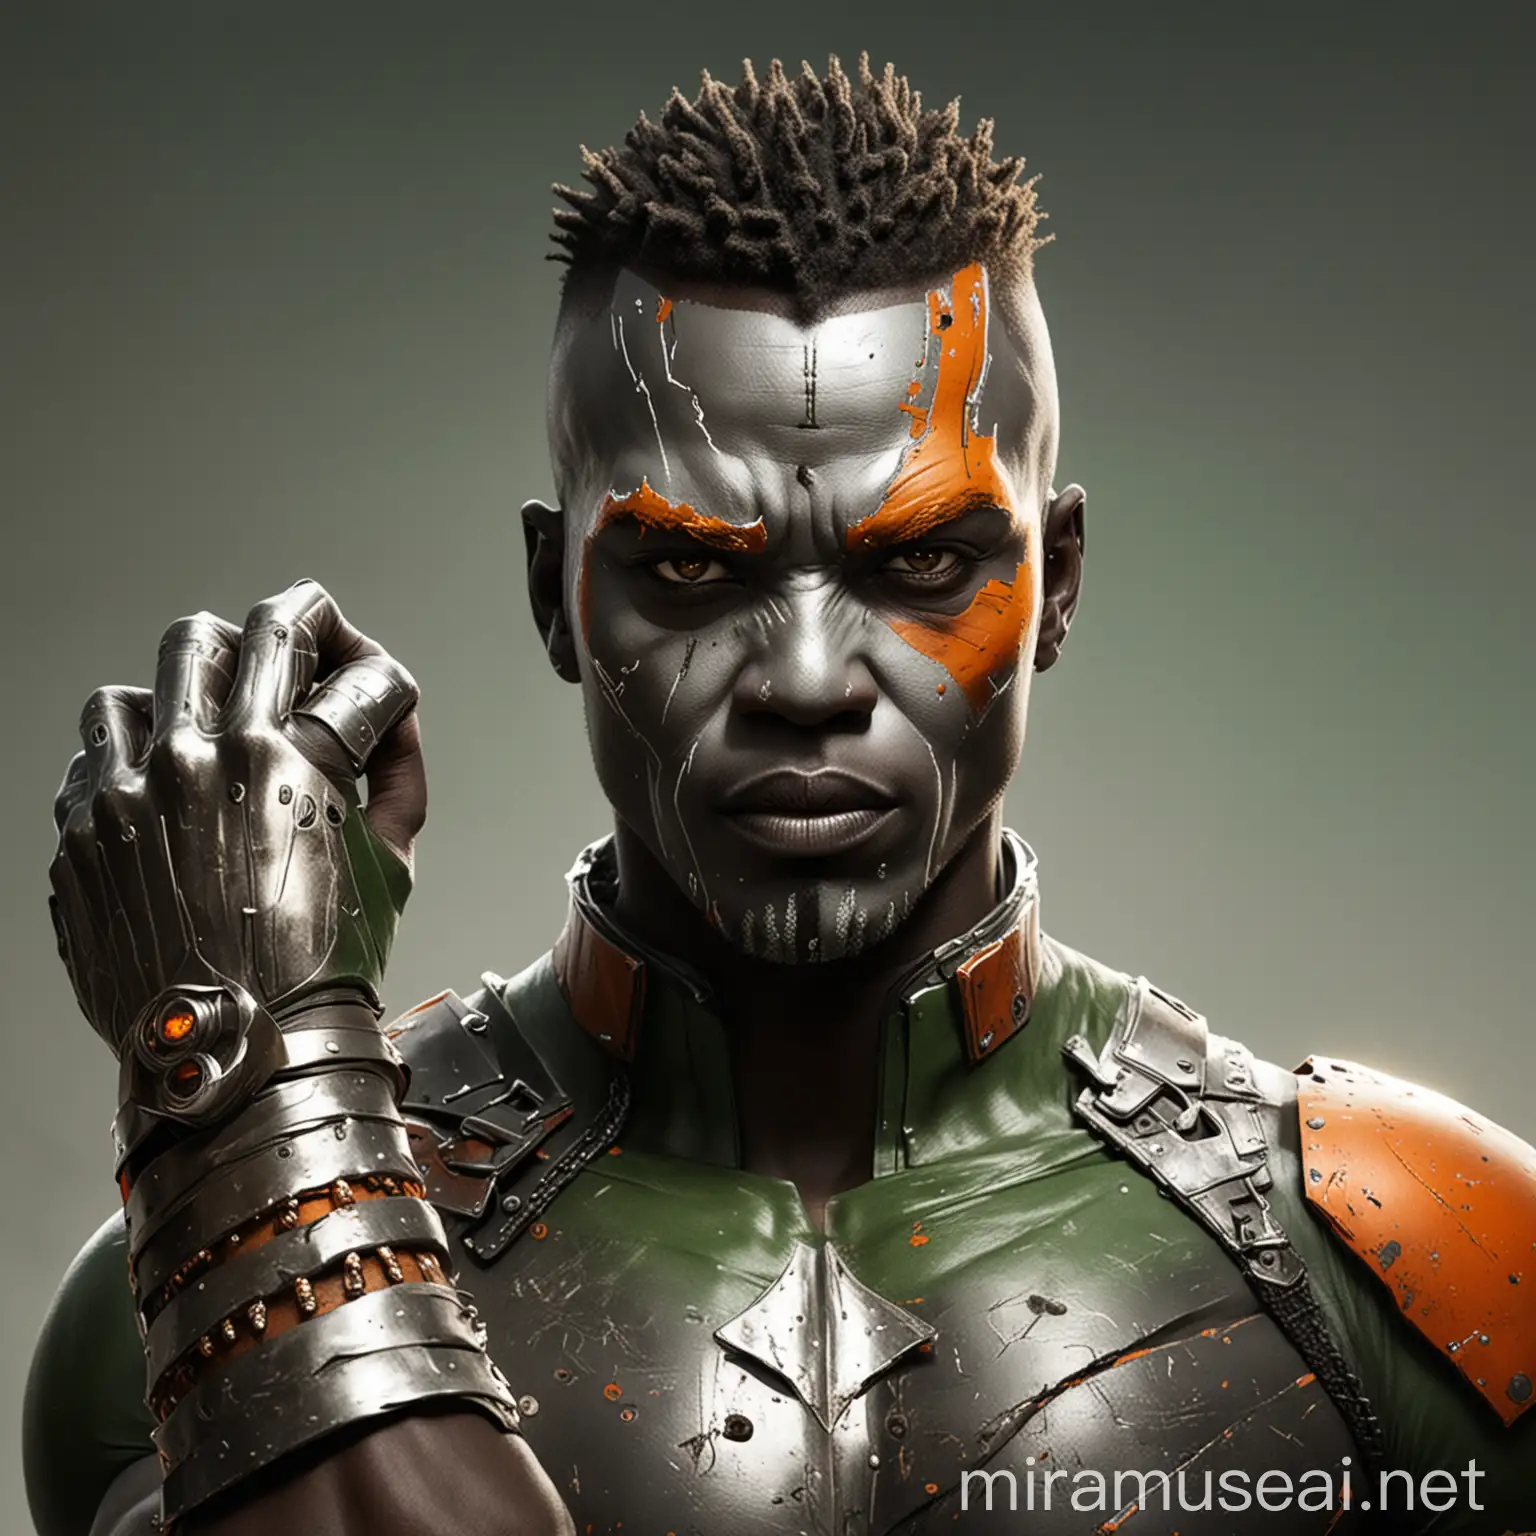 African Superhero with Dread Haircut and Silver Mask in Predominantly Black Setting